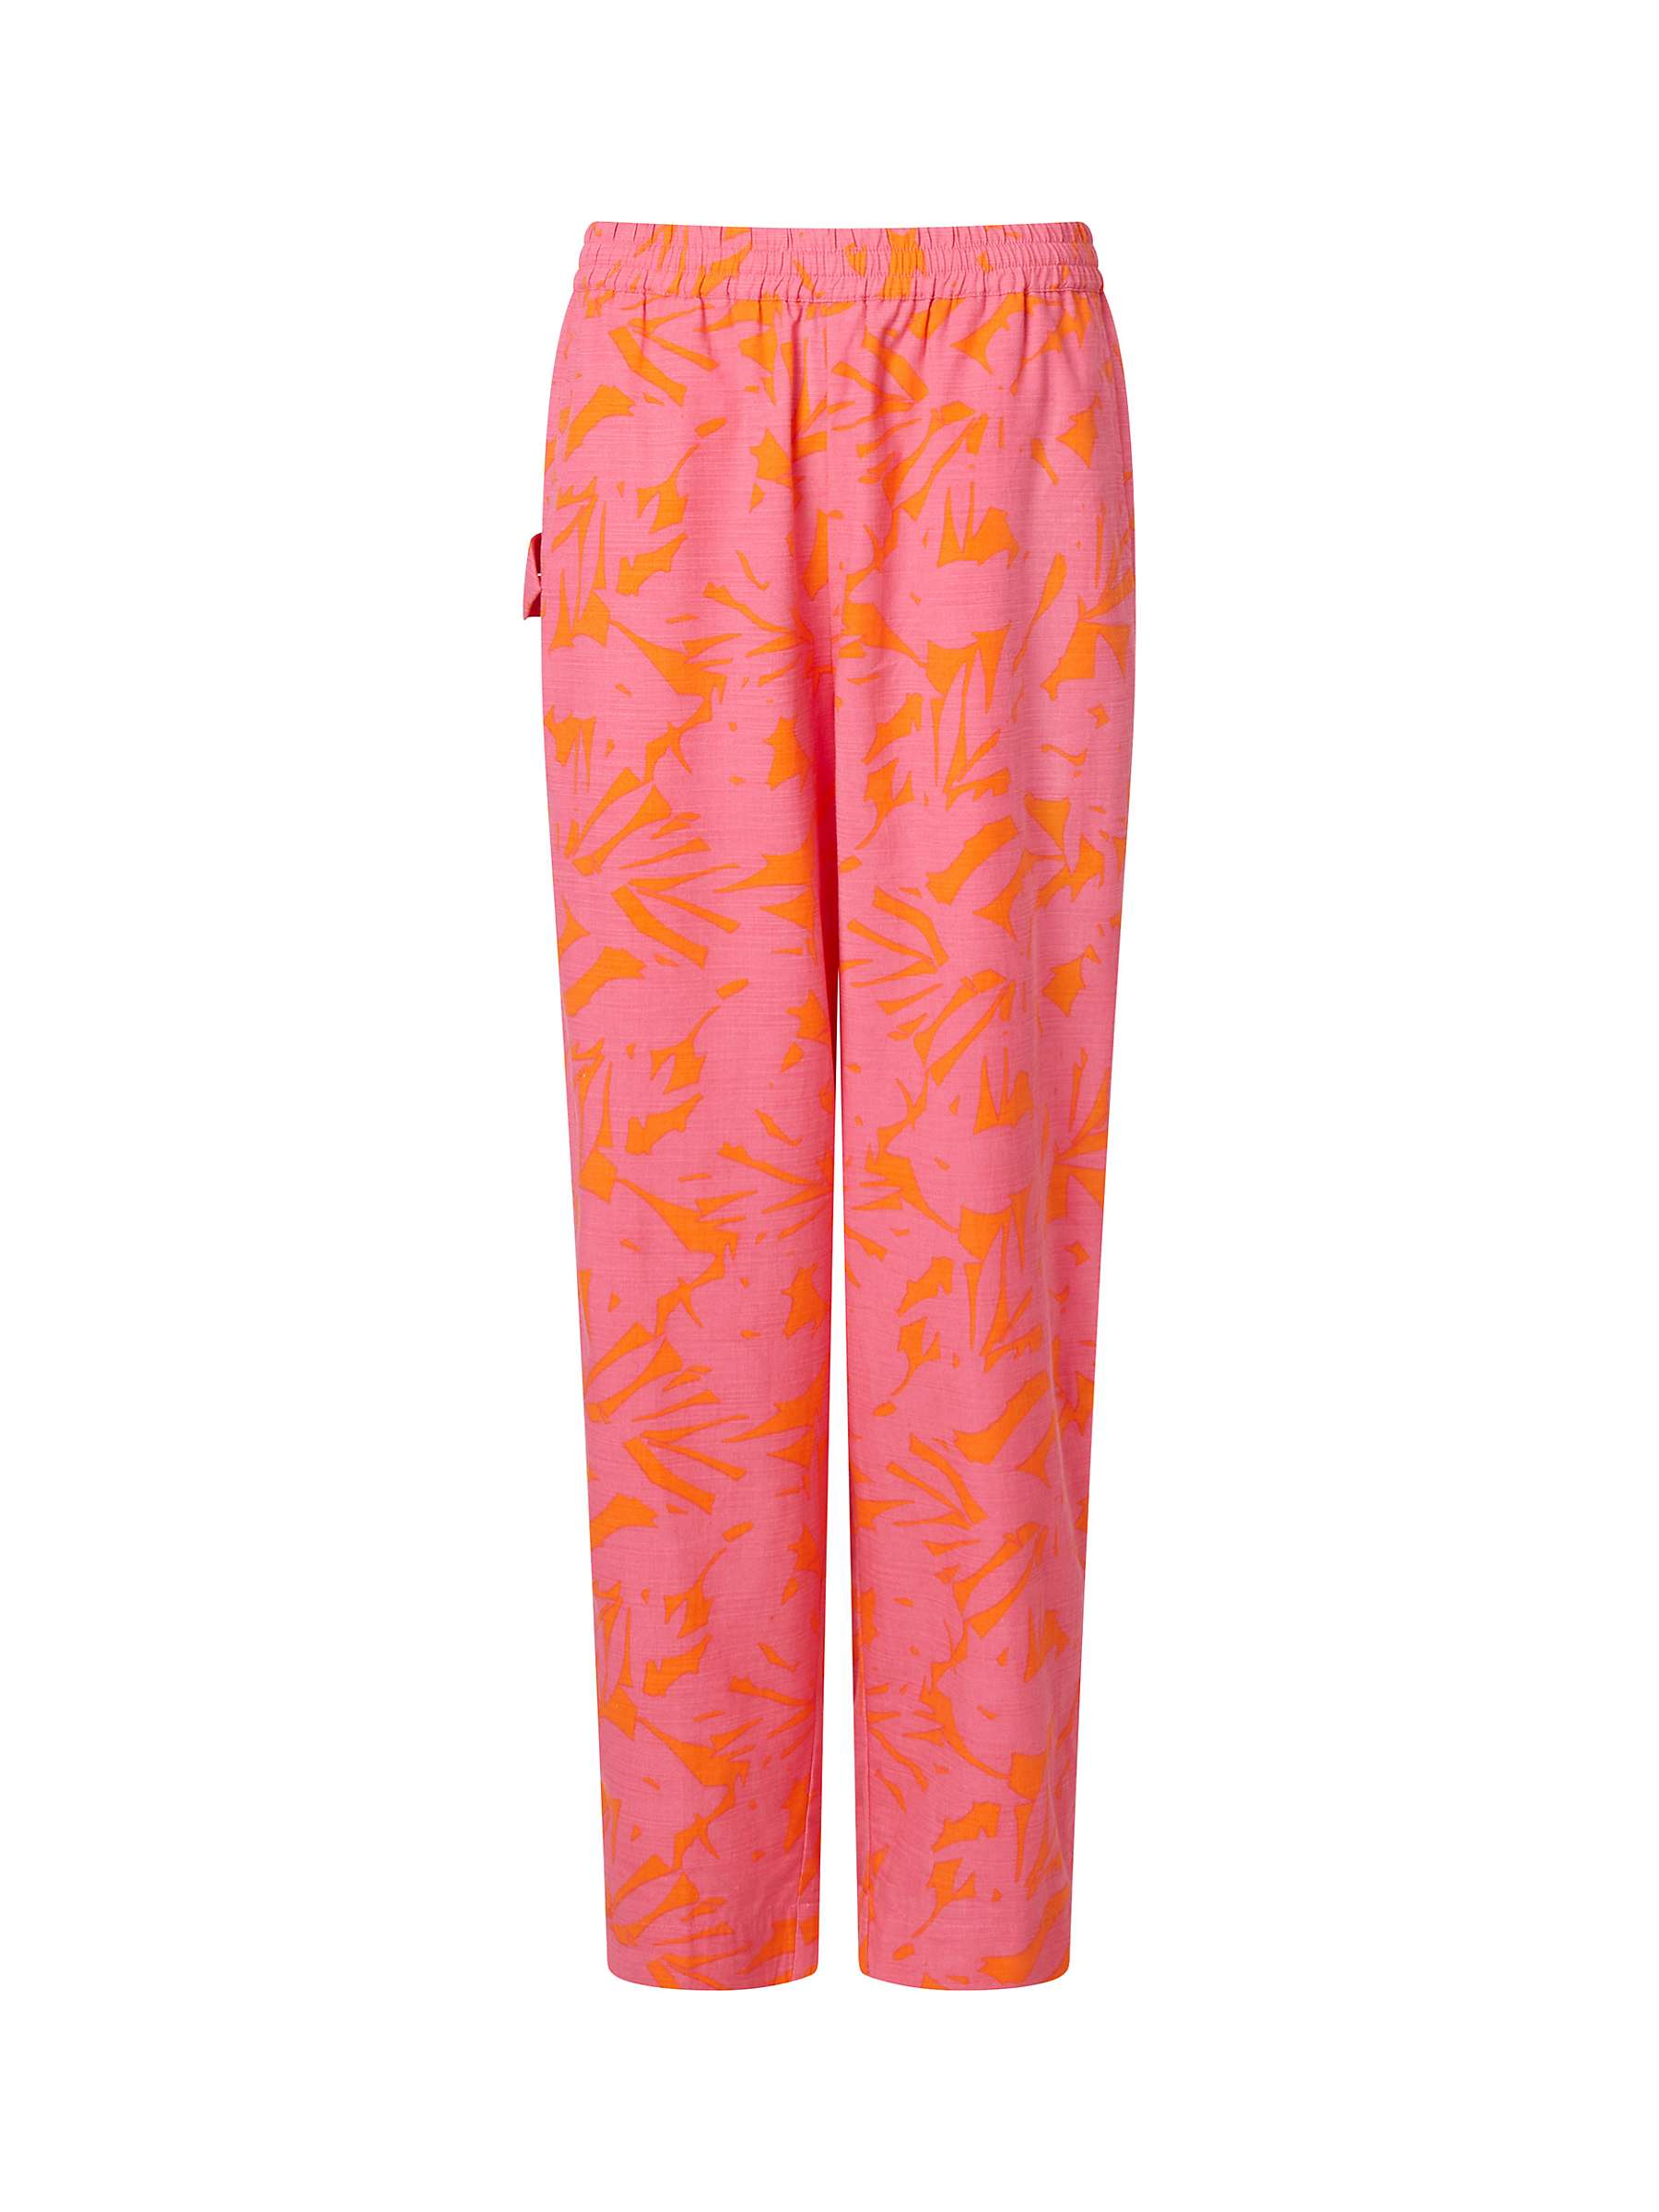 Buy French Connection Bia Alania Trousers, Orange Online at johnlewis.com